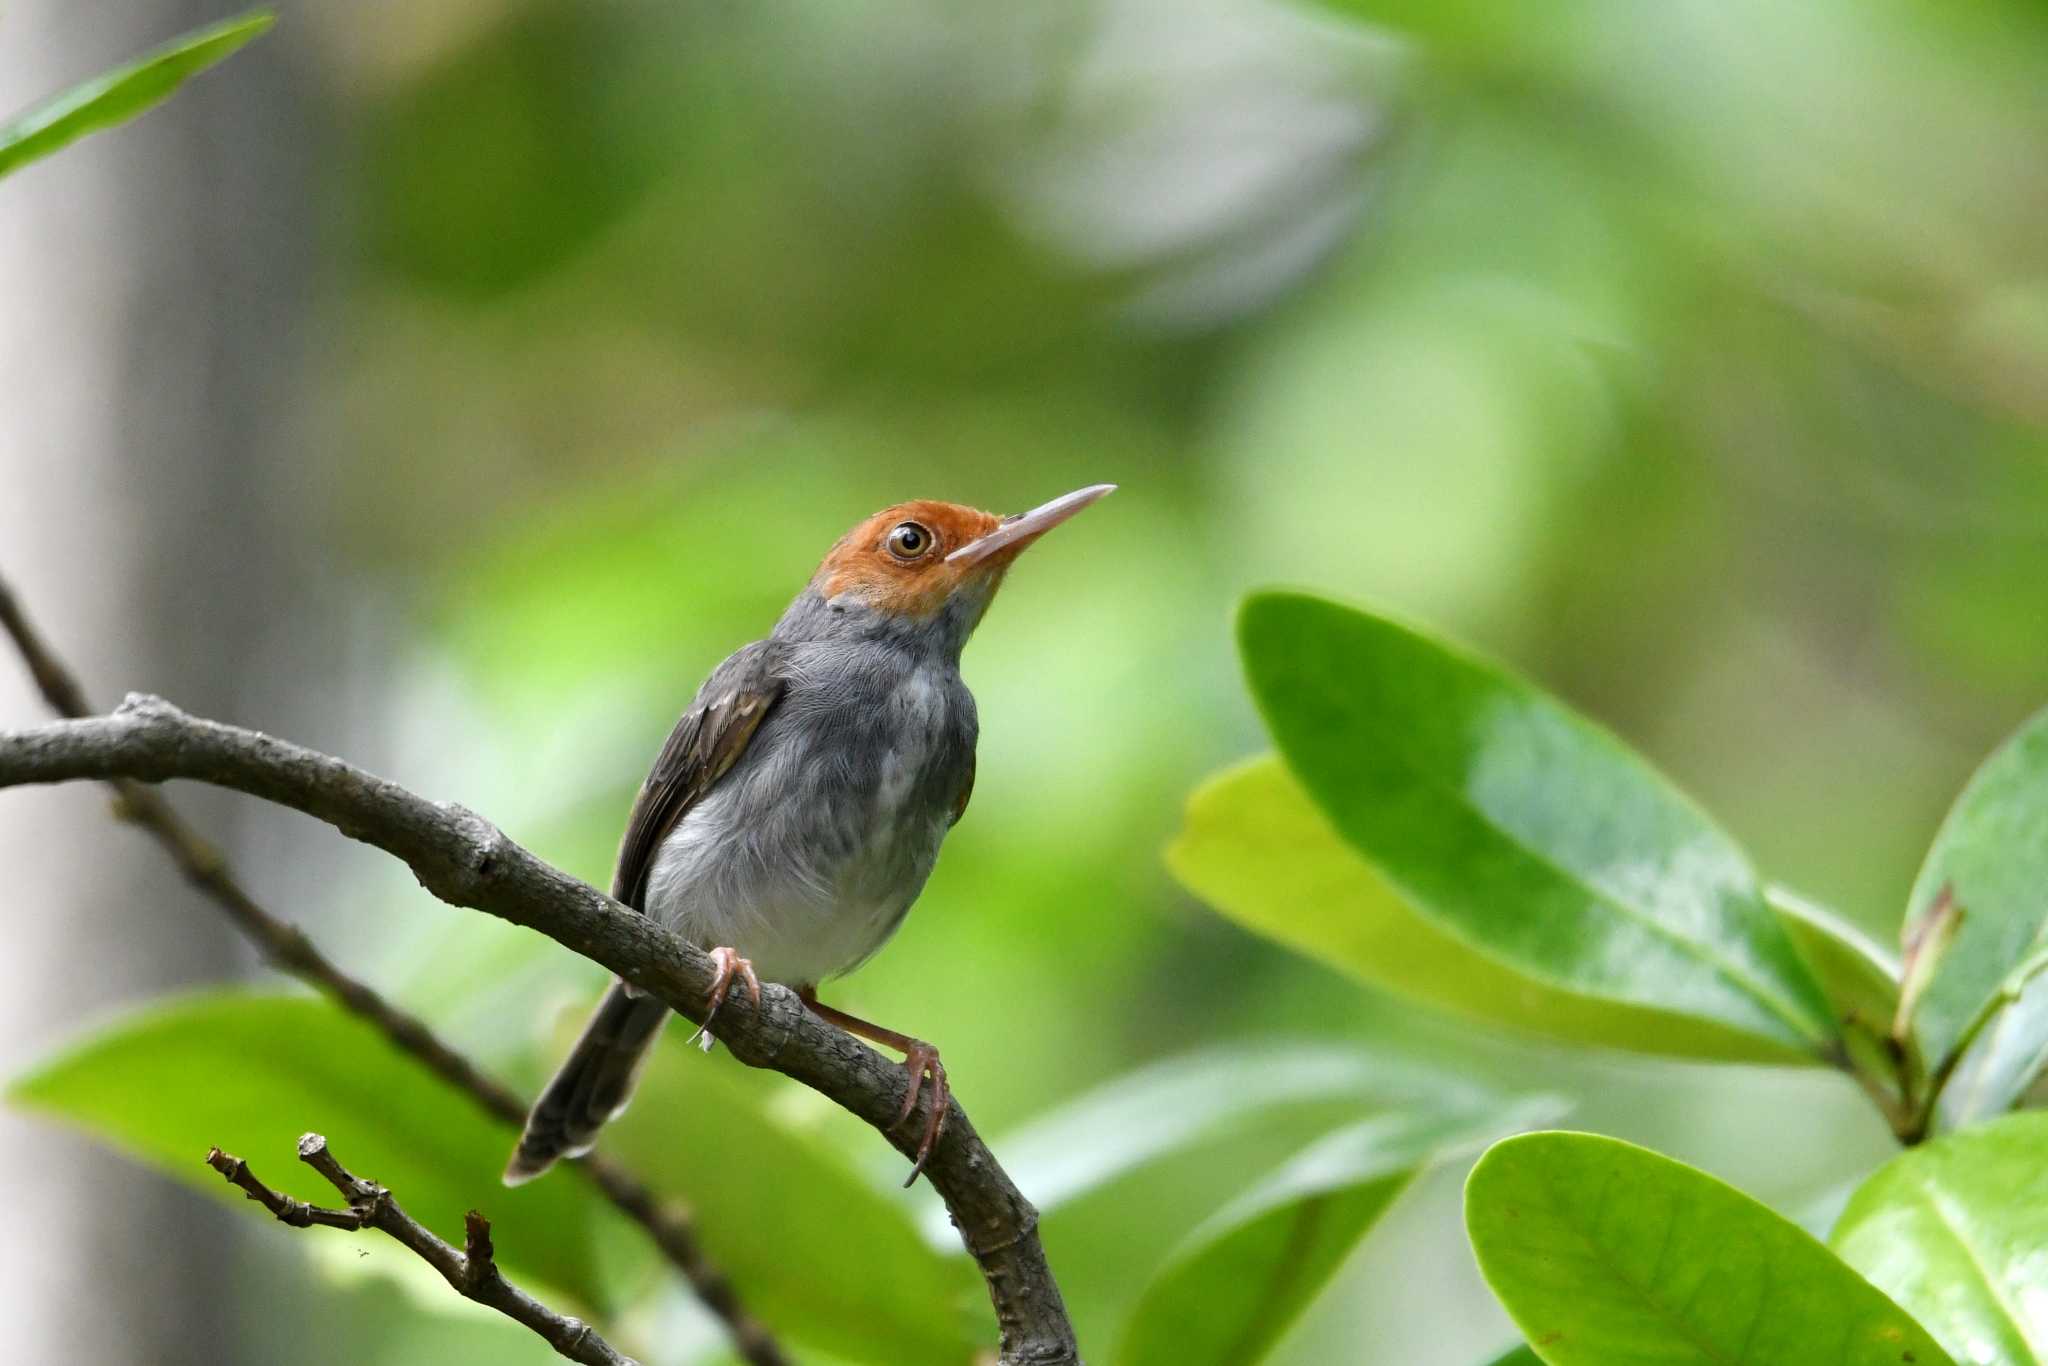 Photo of Ashy Tailorbird at Sungei Buloh Wetland Reserve by あひる